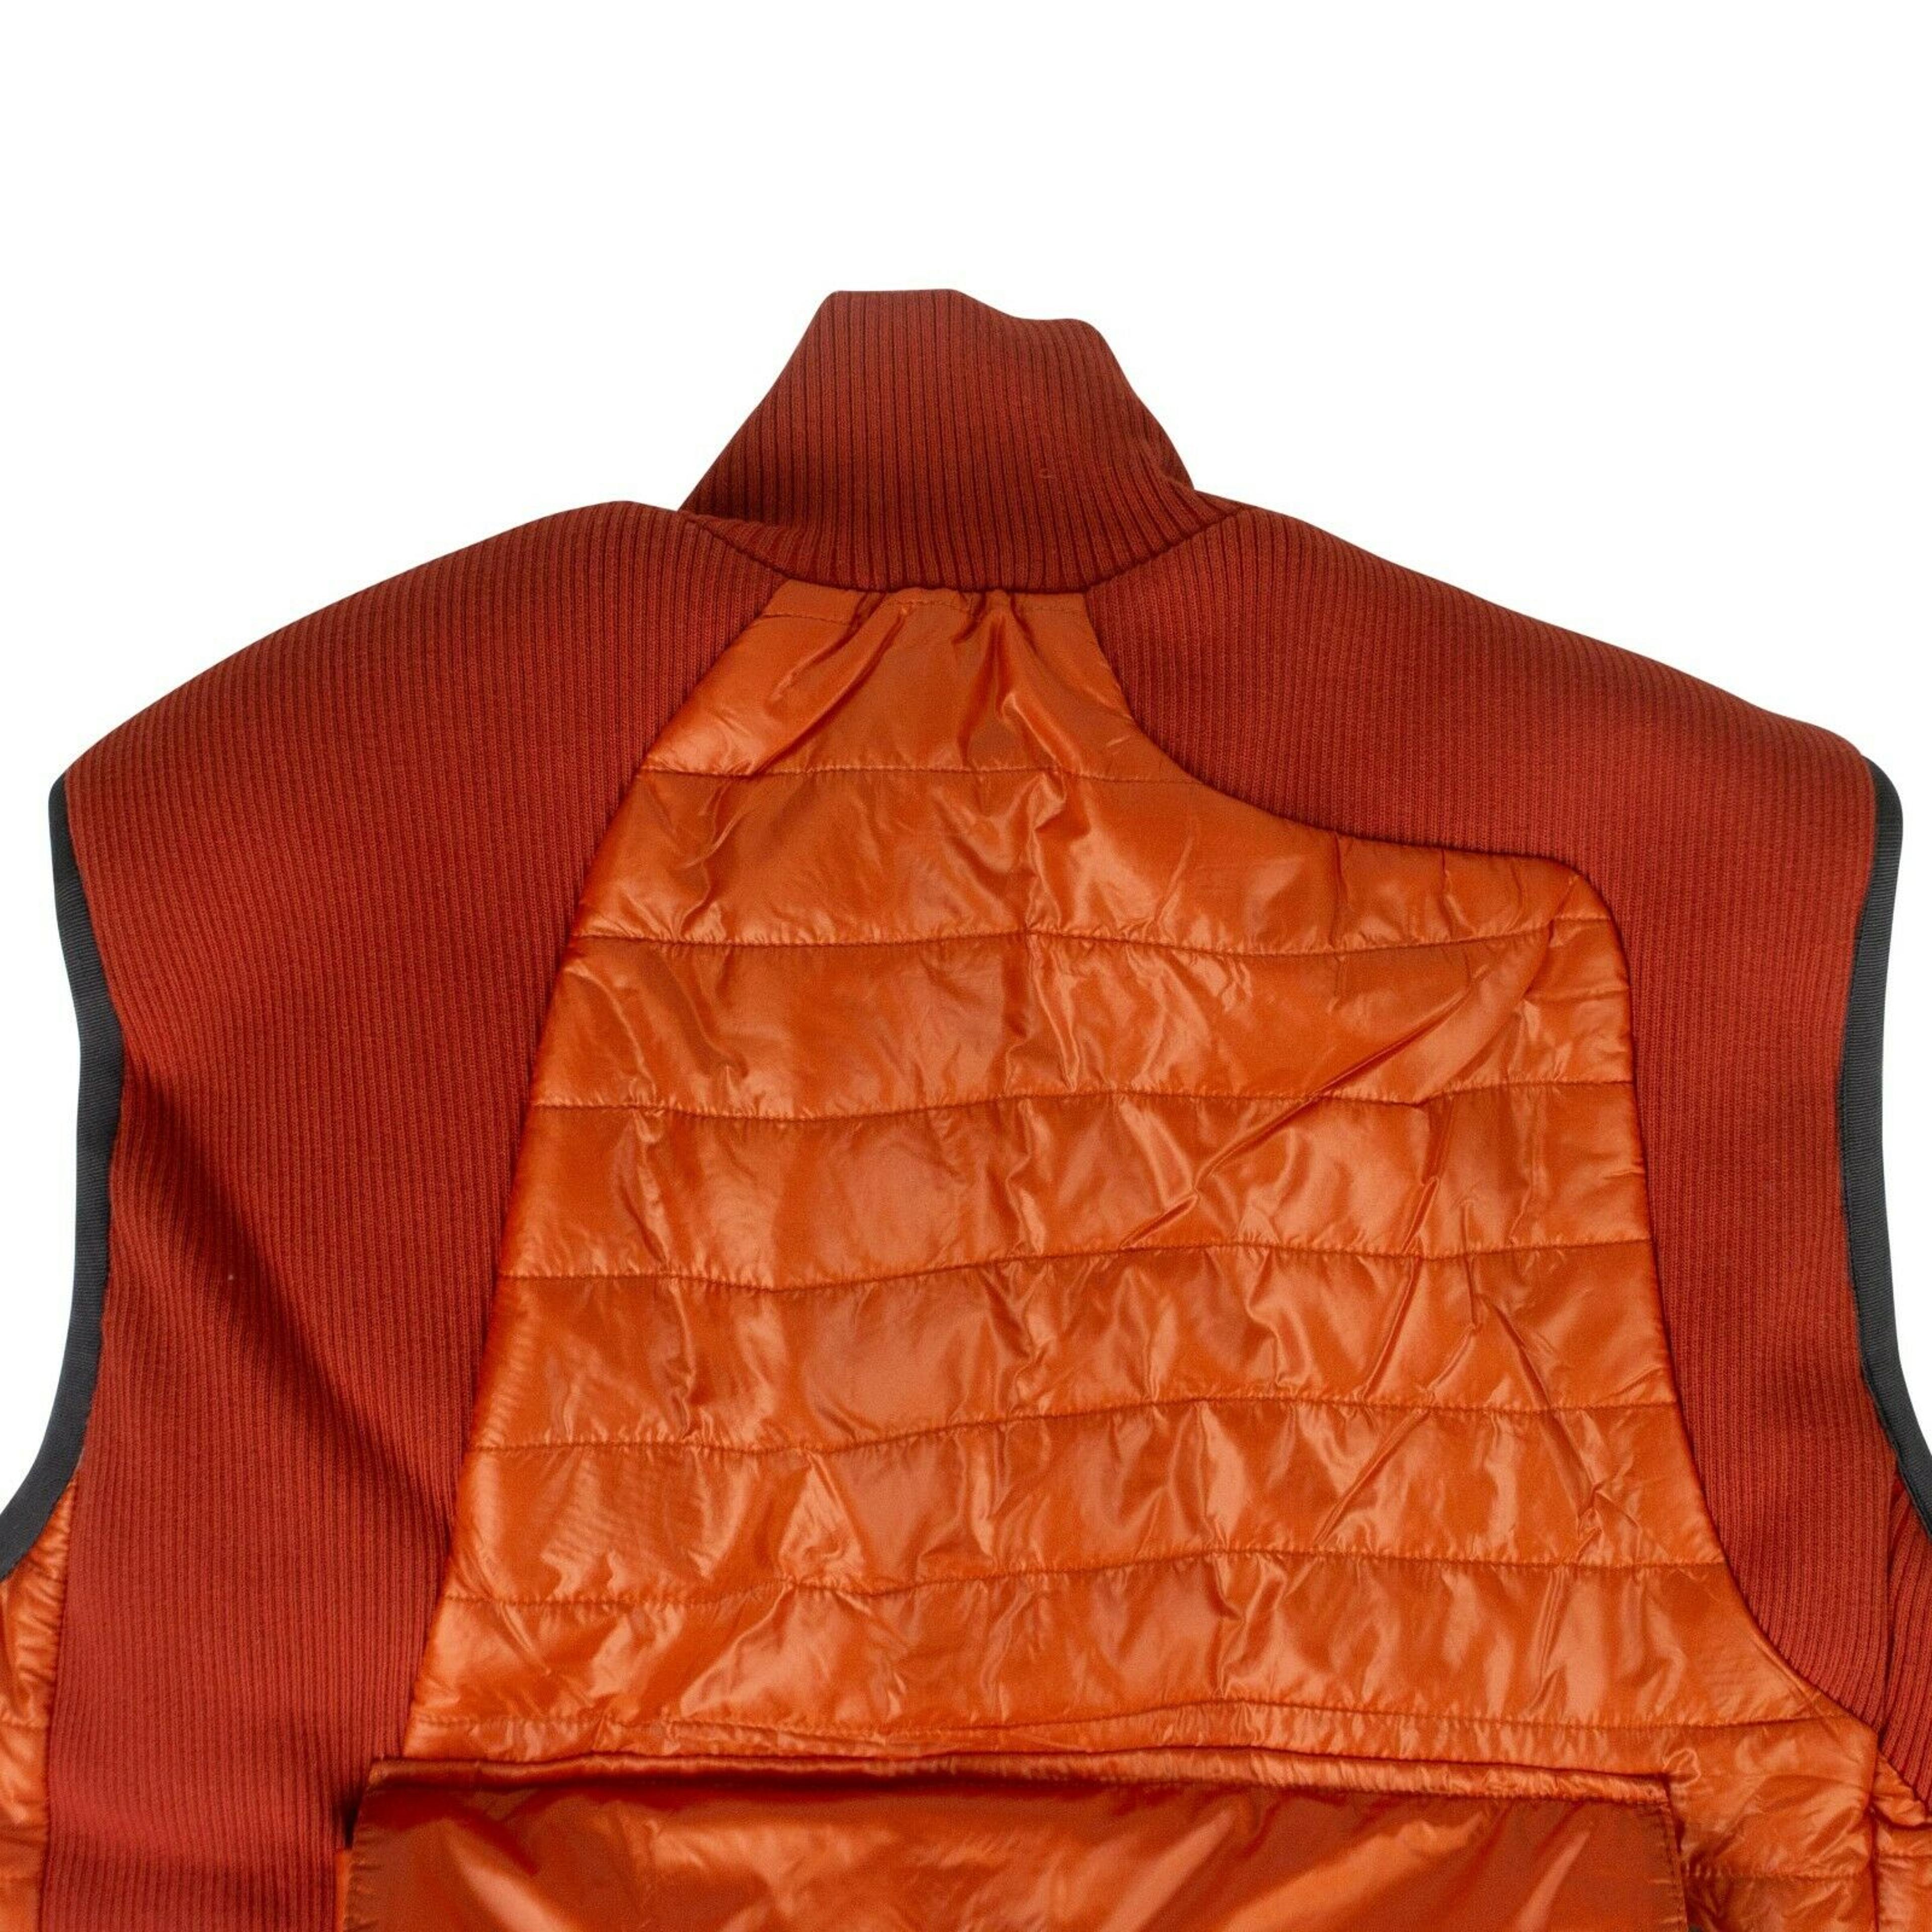 Alternate View 3 of A-COLD-WALL* Men's Puffer Panelled Jacket Vest - Orange